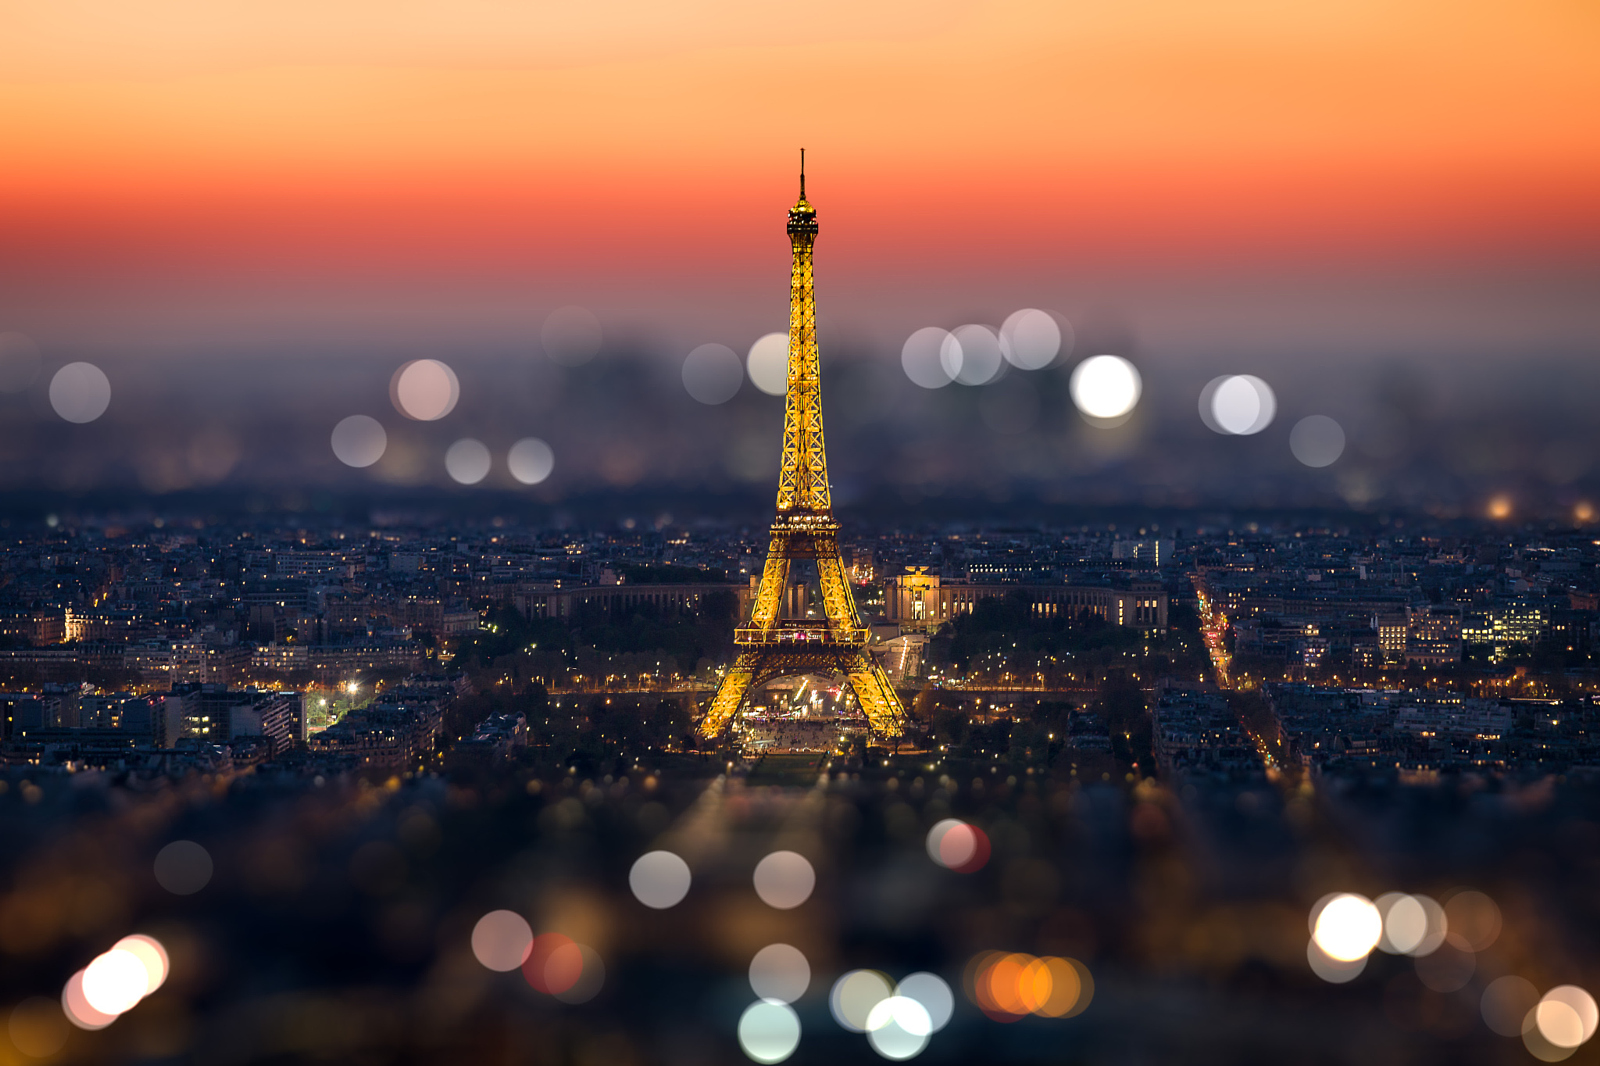 30 Beautiful Bokeh Pictures & Images to Capture Your Imagination